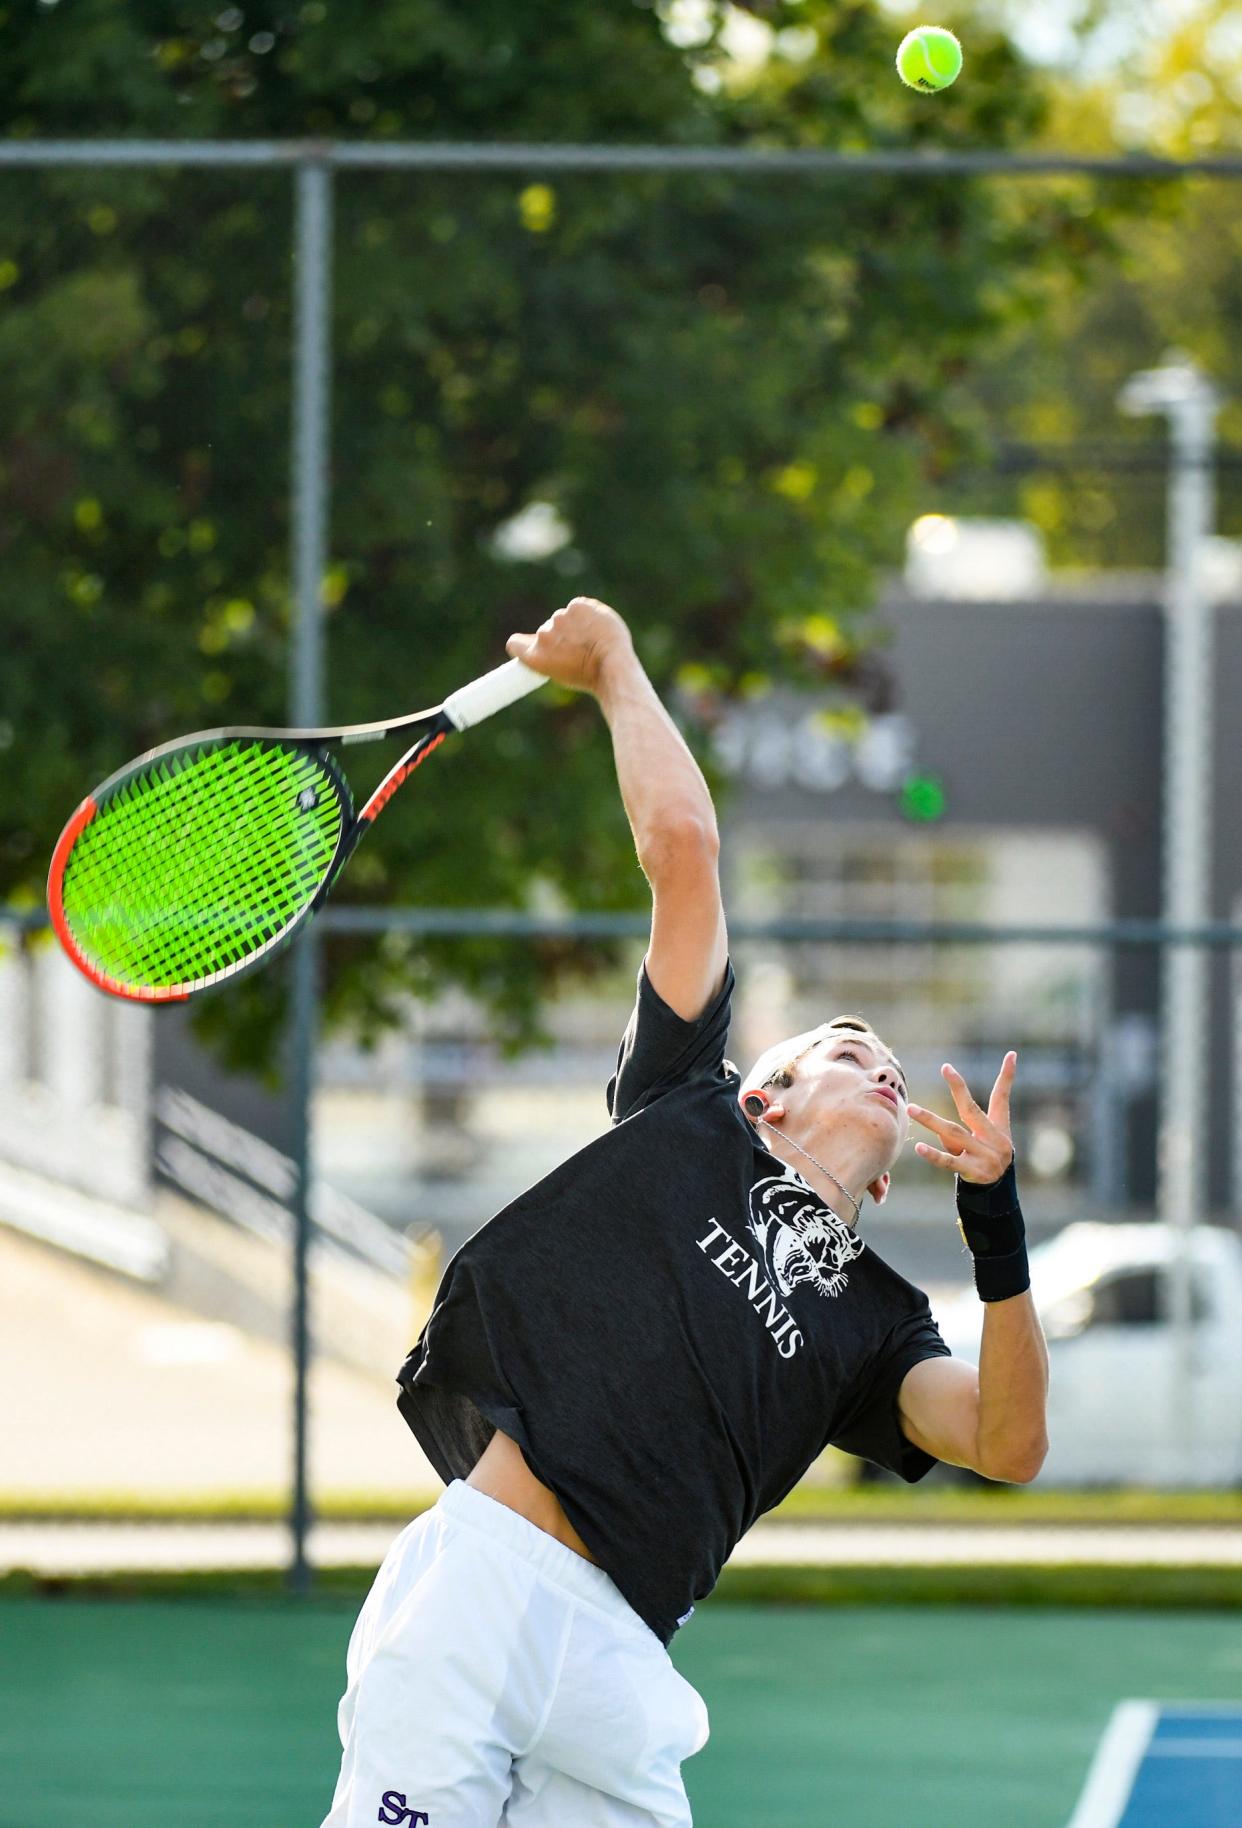 Bloomington South’s Michael Asplund serves the ball during his No. 1 singles match against Bloomington North’s Nick Shirley during the Bloomington North-Bloomington South tennis match at South in 2021.